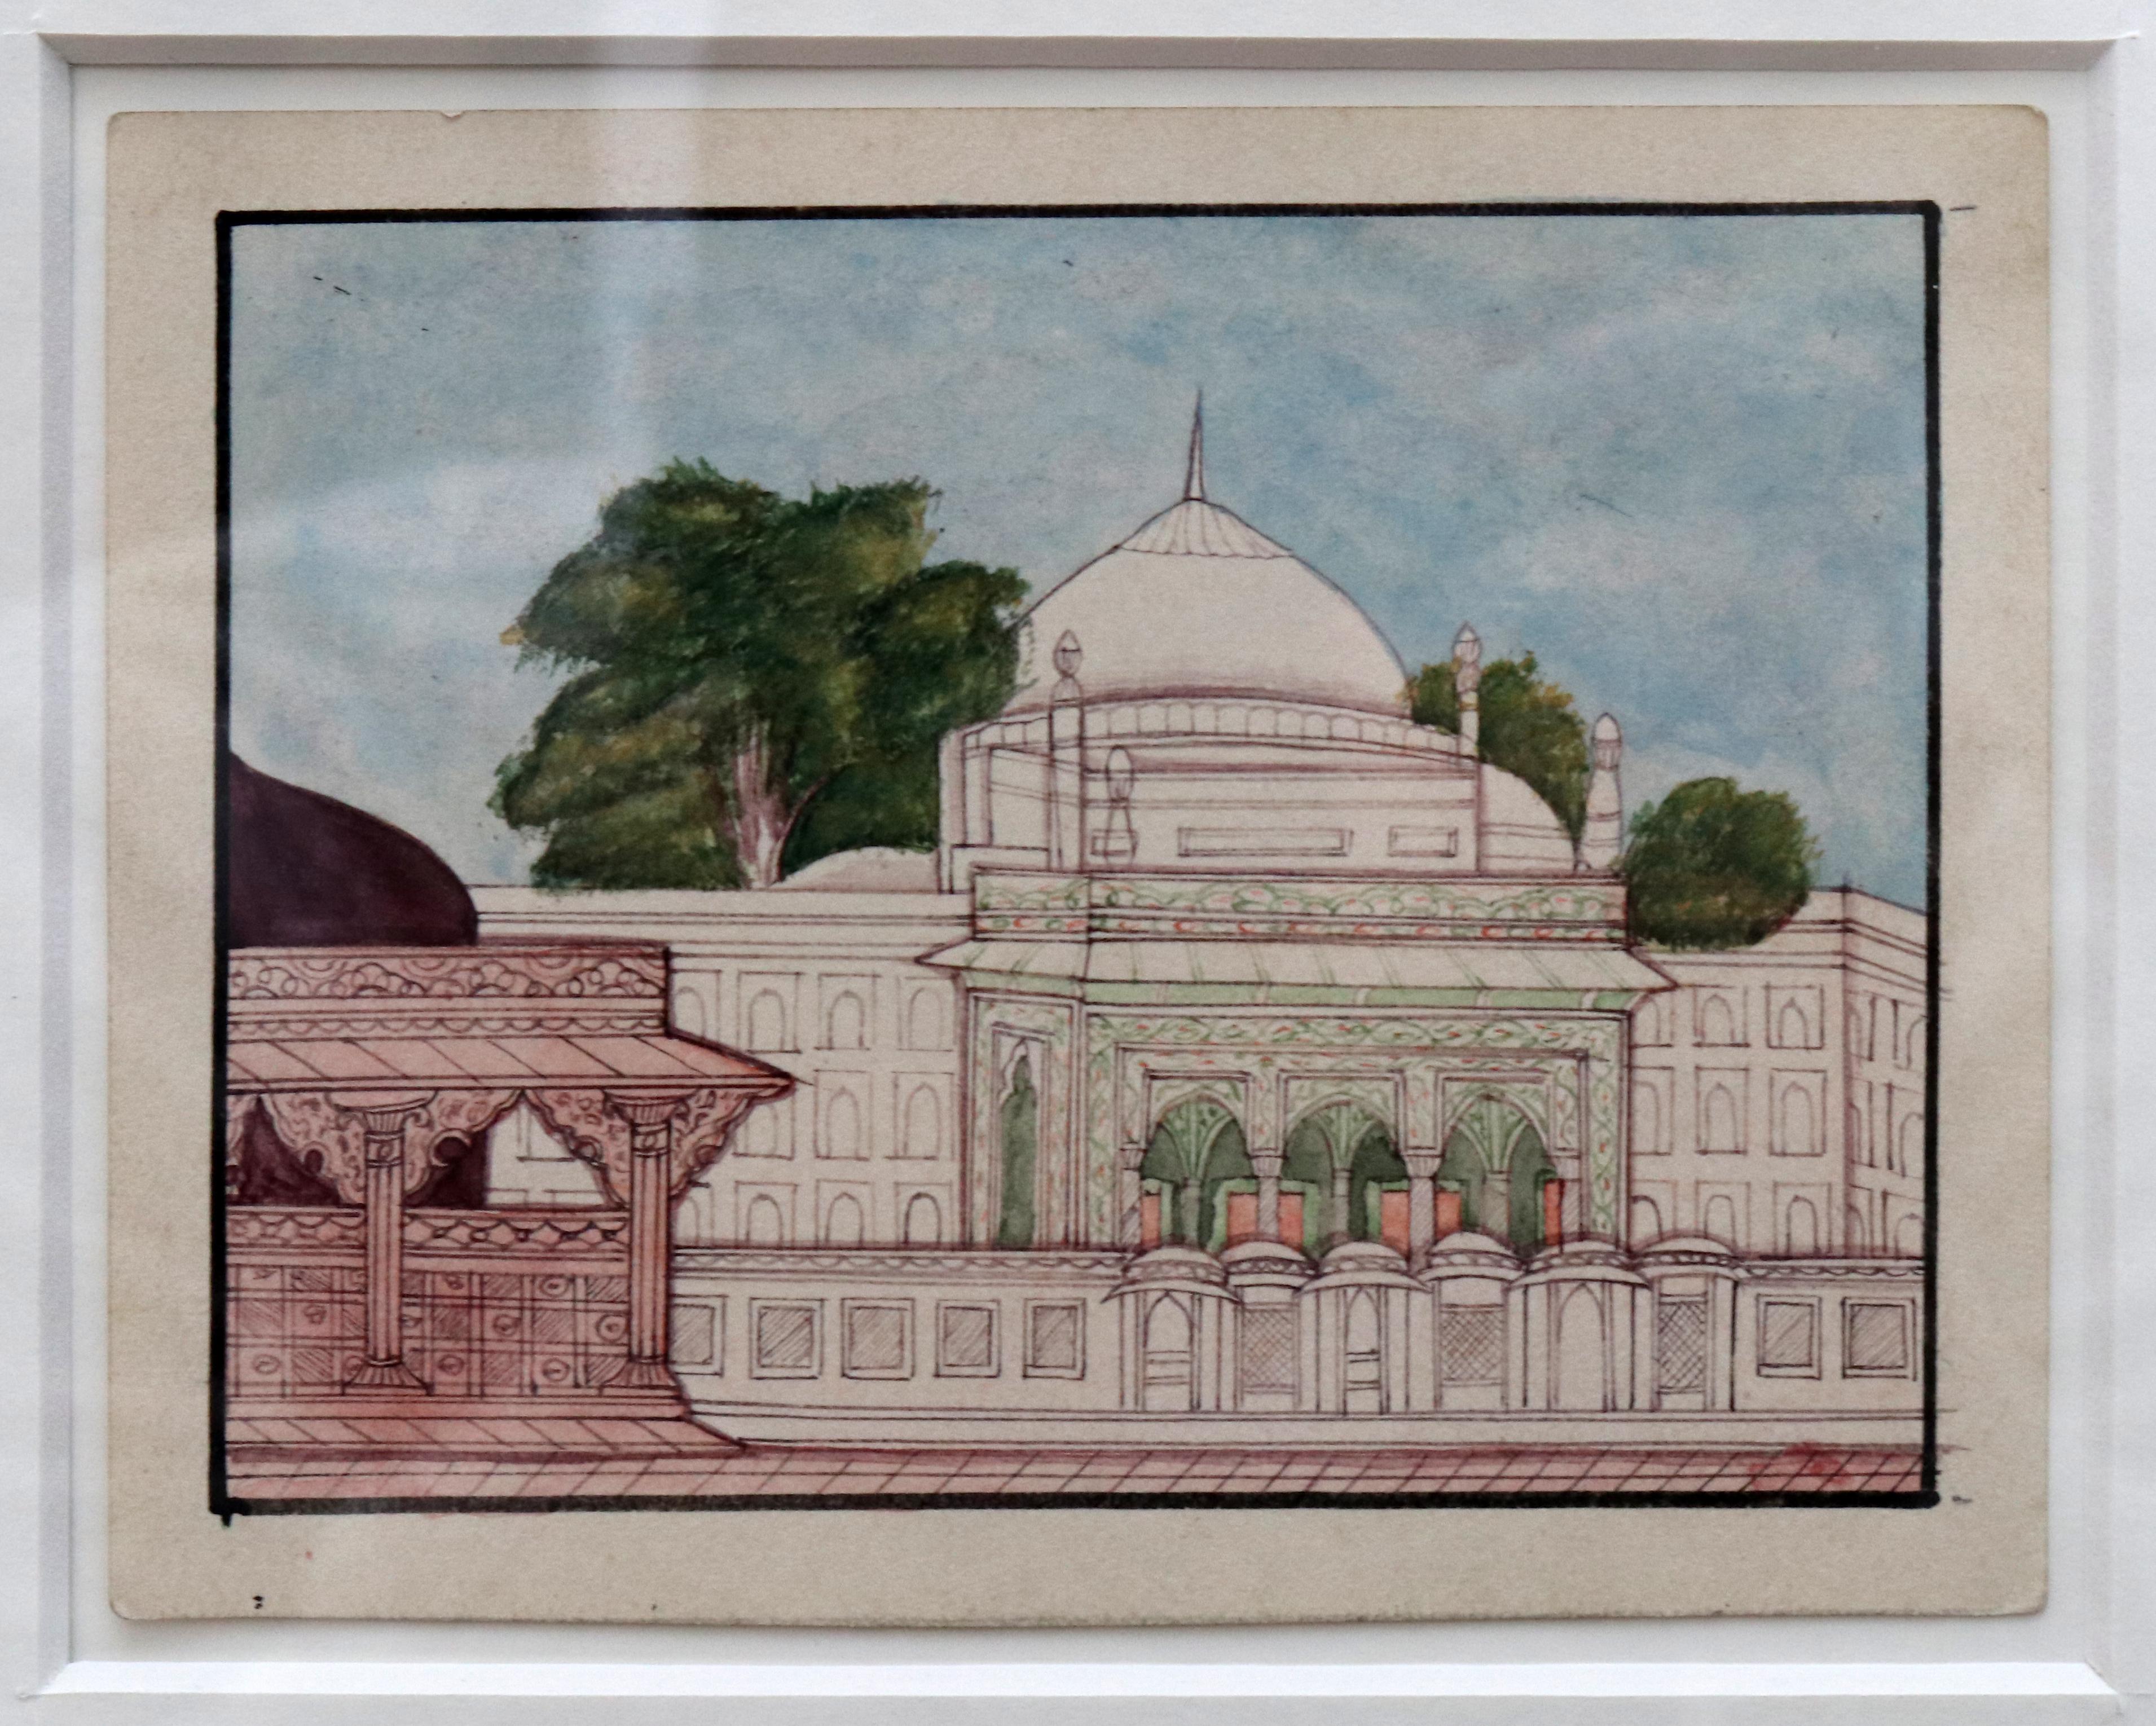 1950s Framed Collage Painting Composed of 9 Small Hand Drawn Indian Palaces For Sale 1